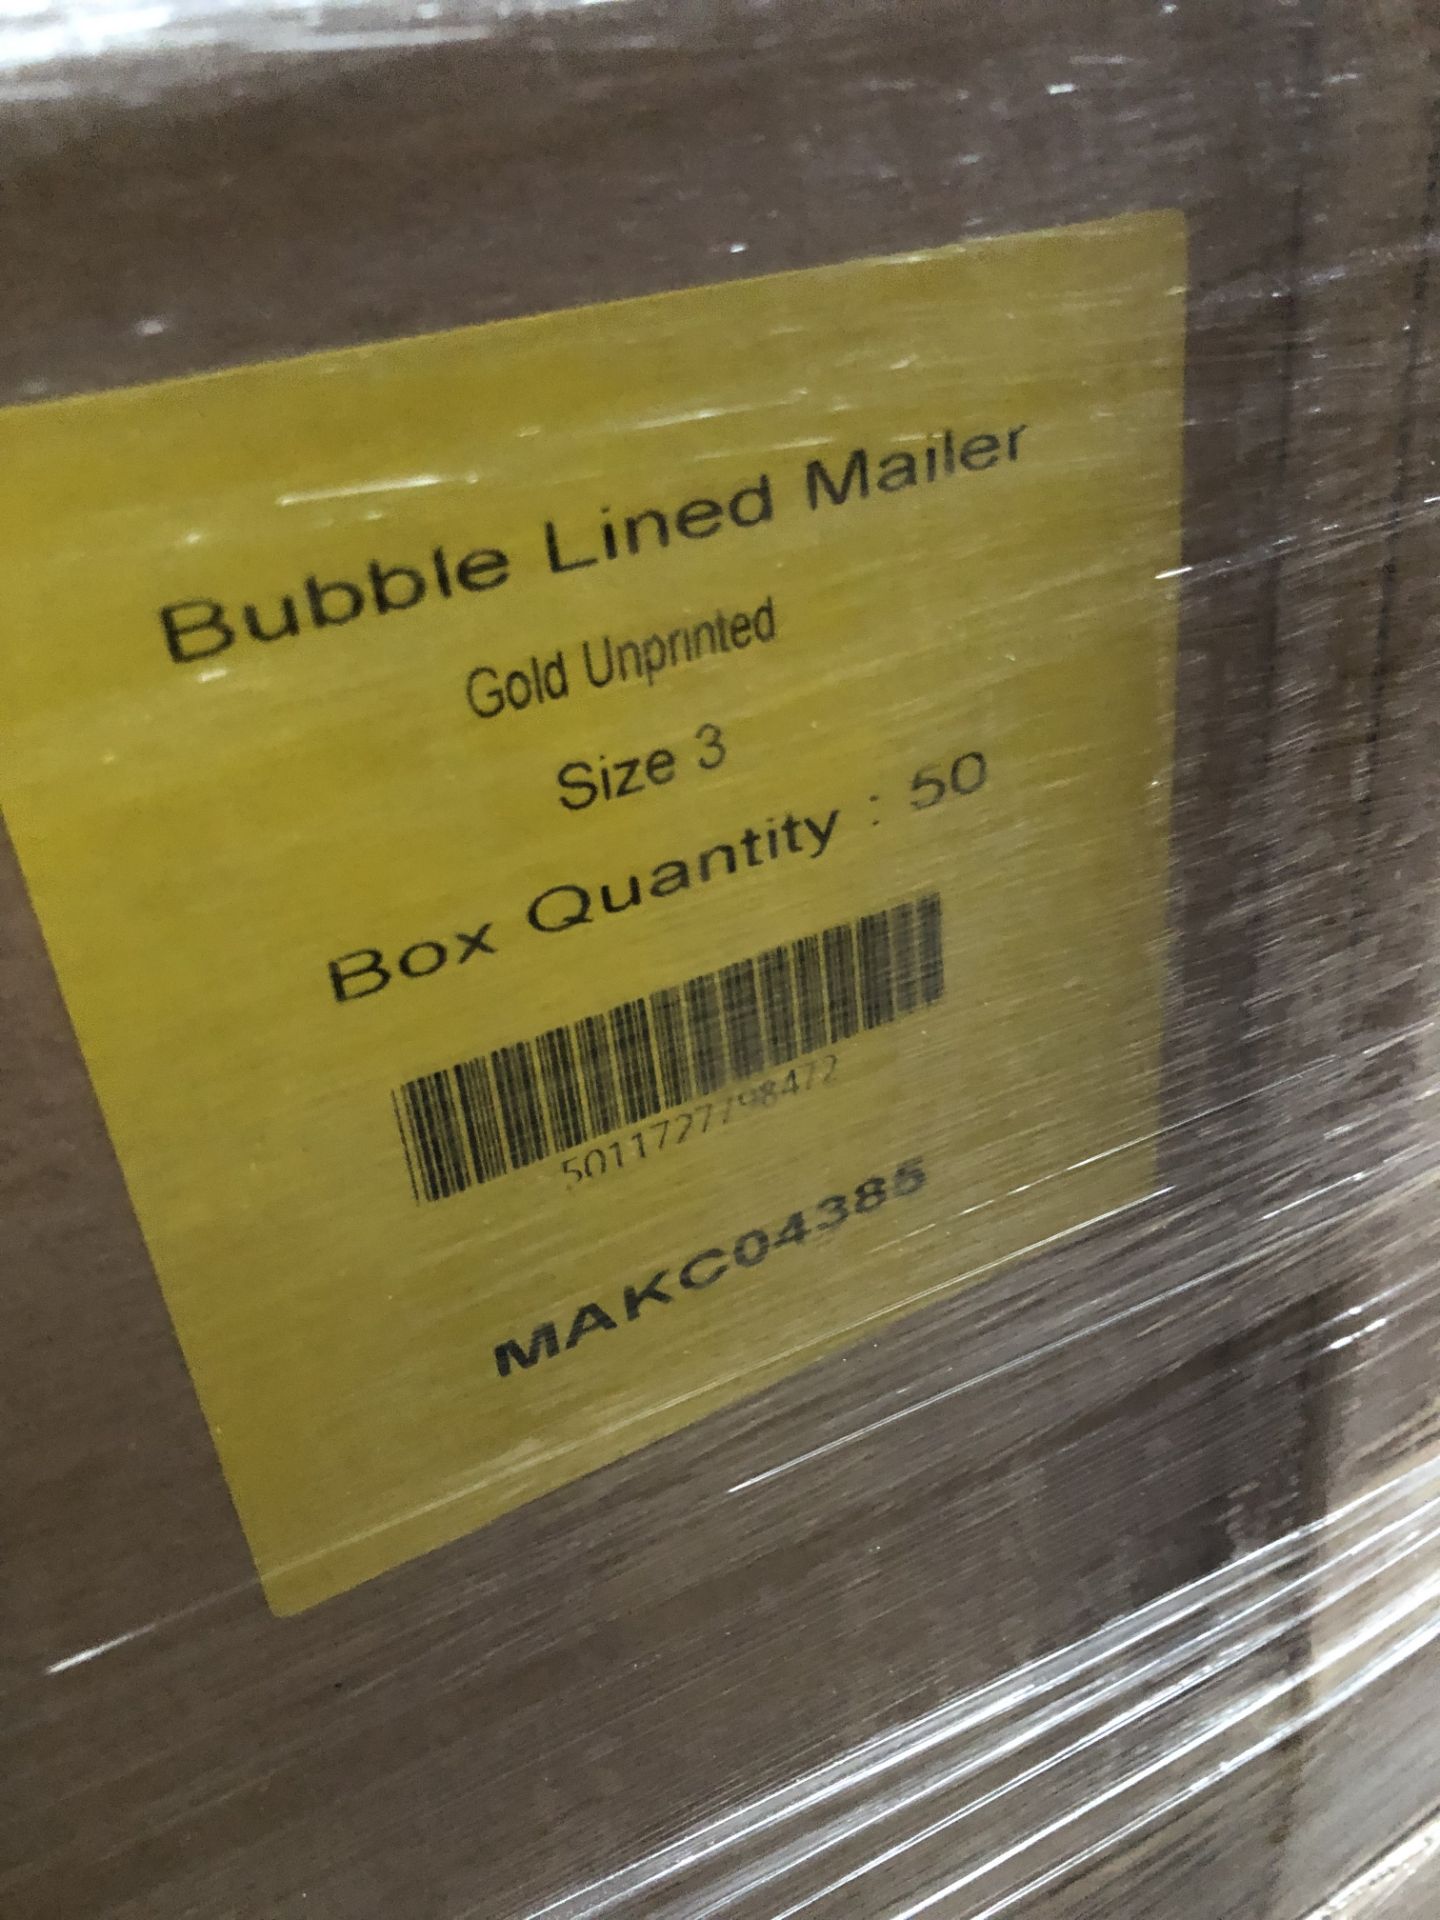 Pallet of Bubble Lined Mailer, gold, unprinted, bo - Image 2 of 2